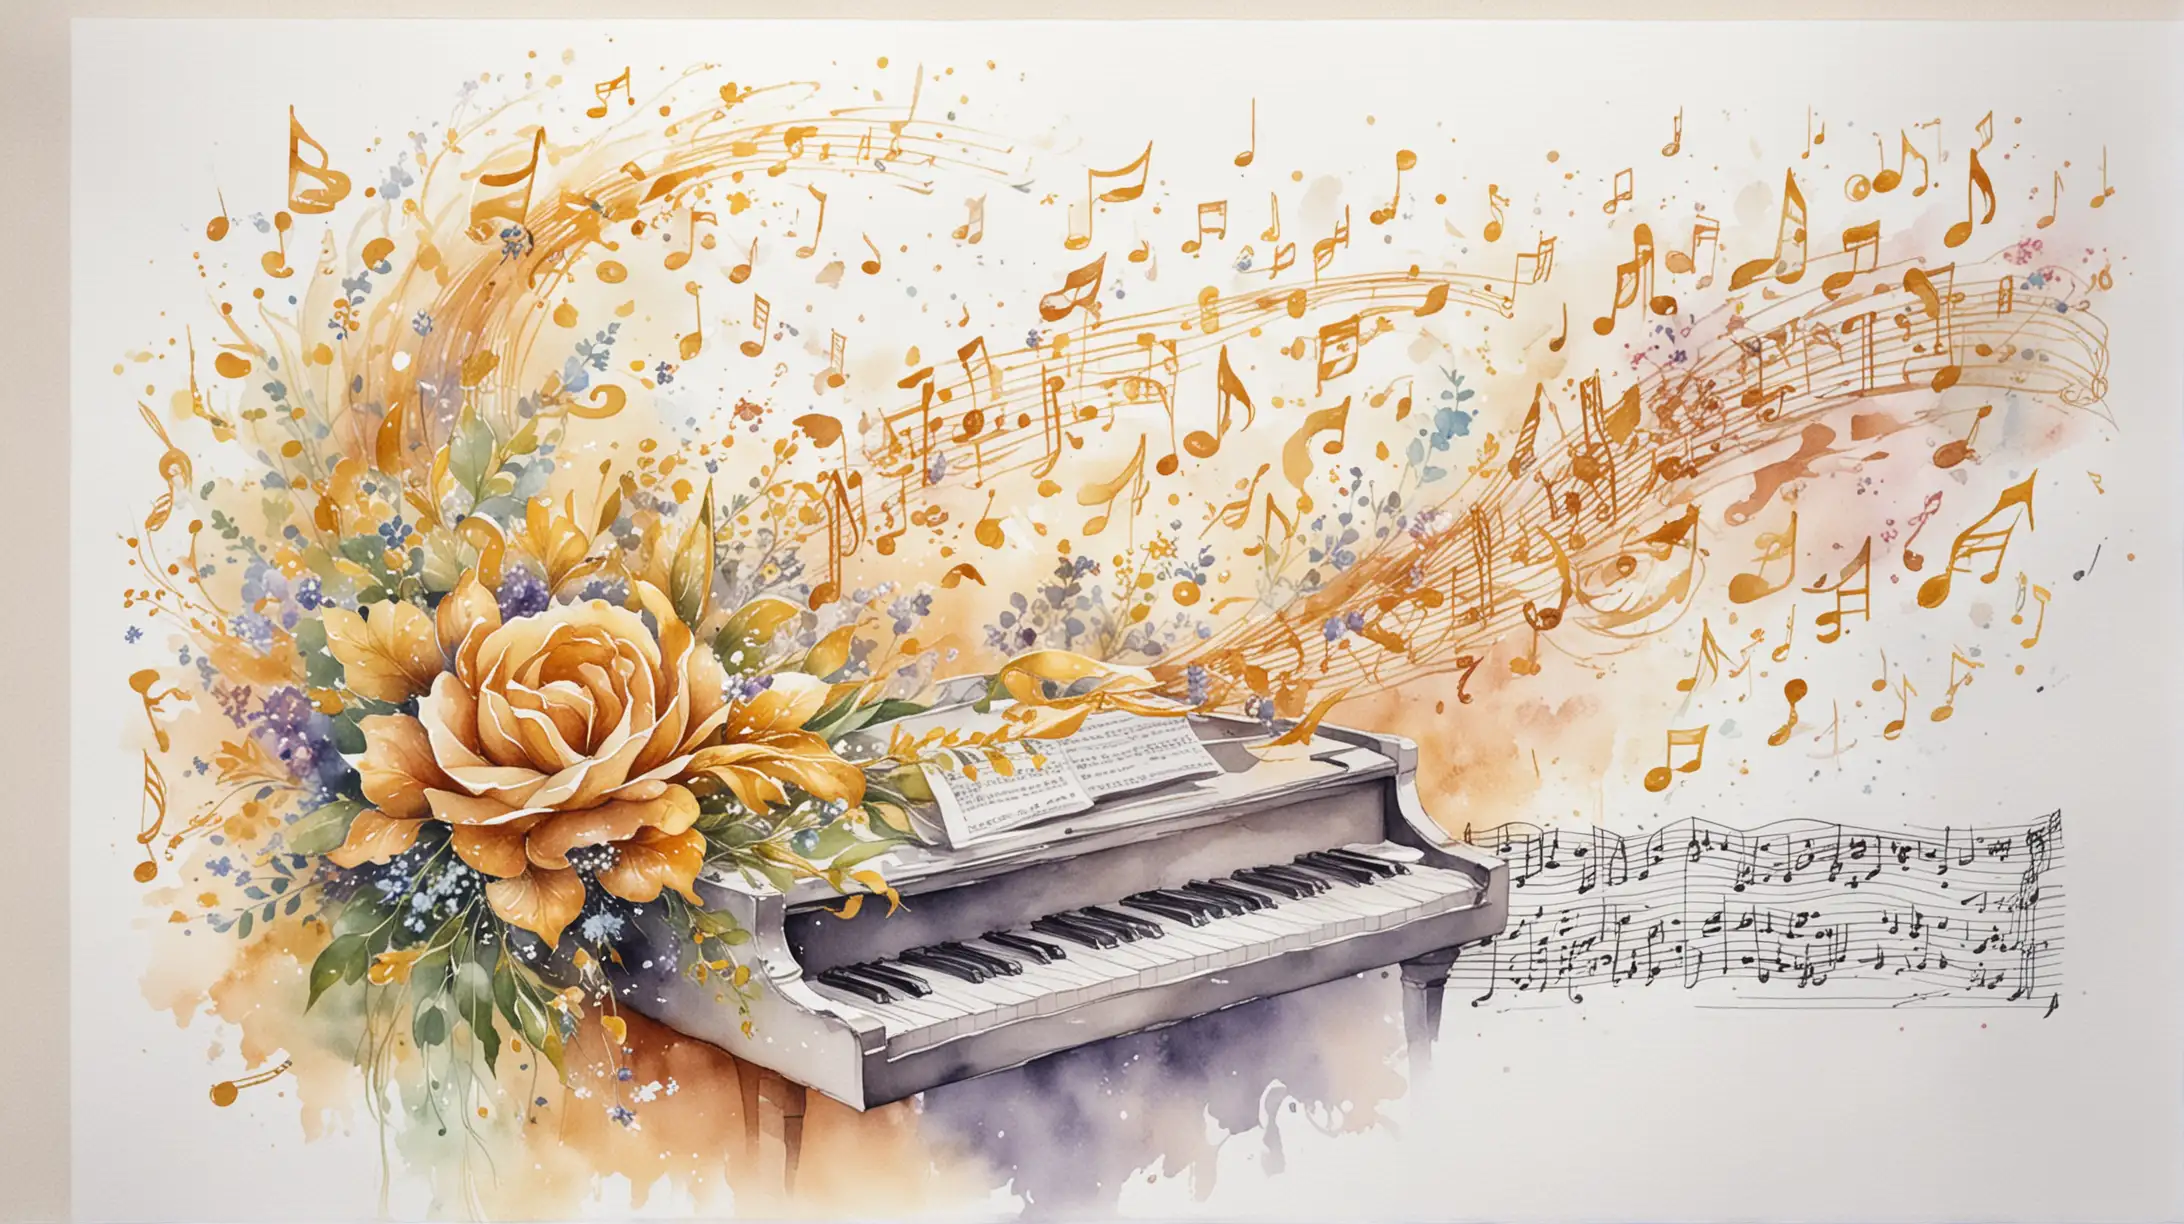 Curly Sheet Music with Flying Golden Notes in Anime Watercolor Style